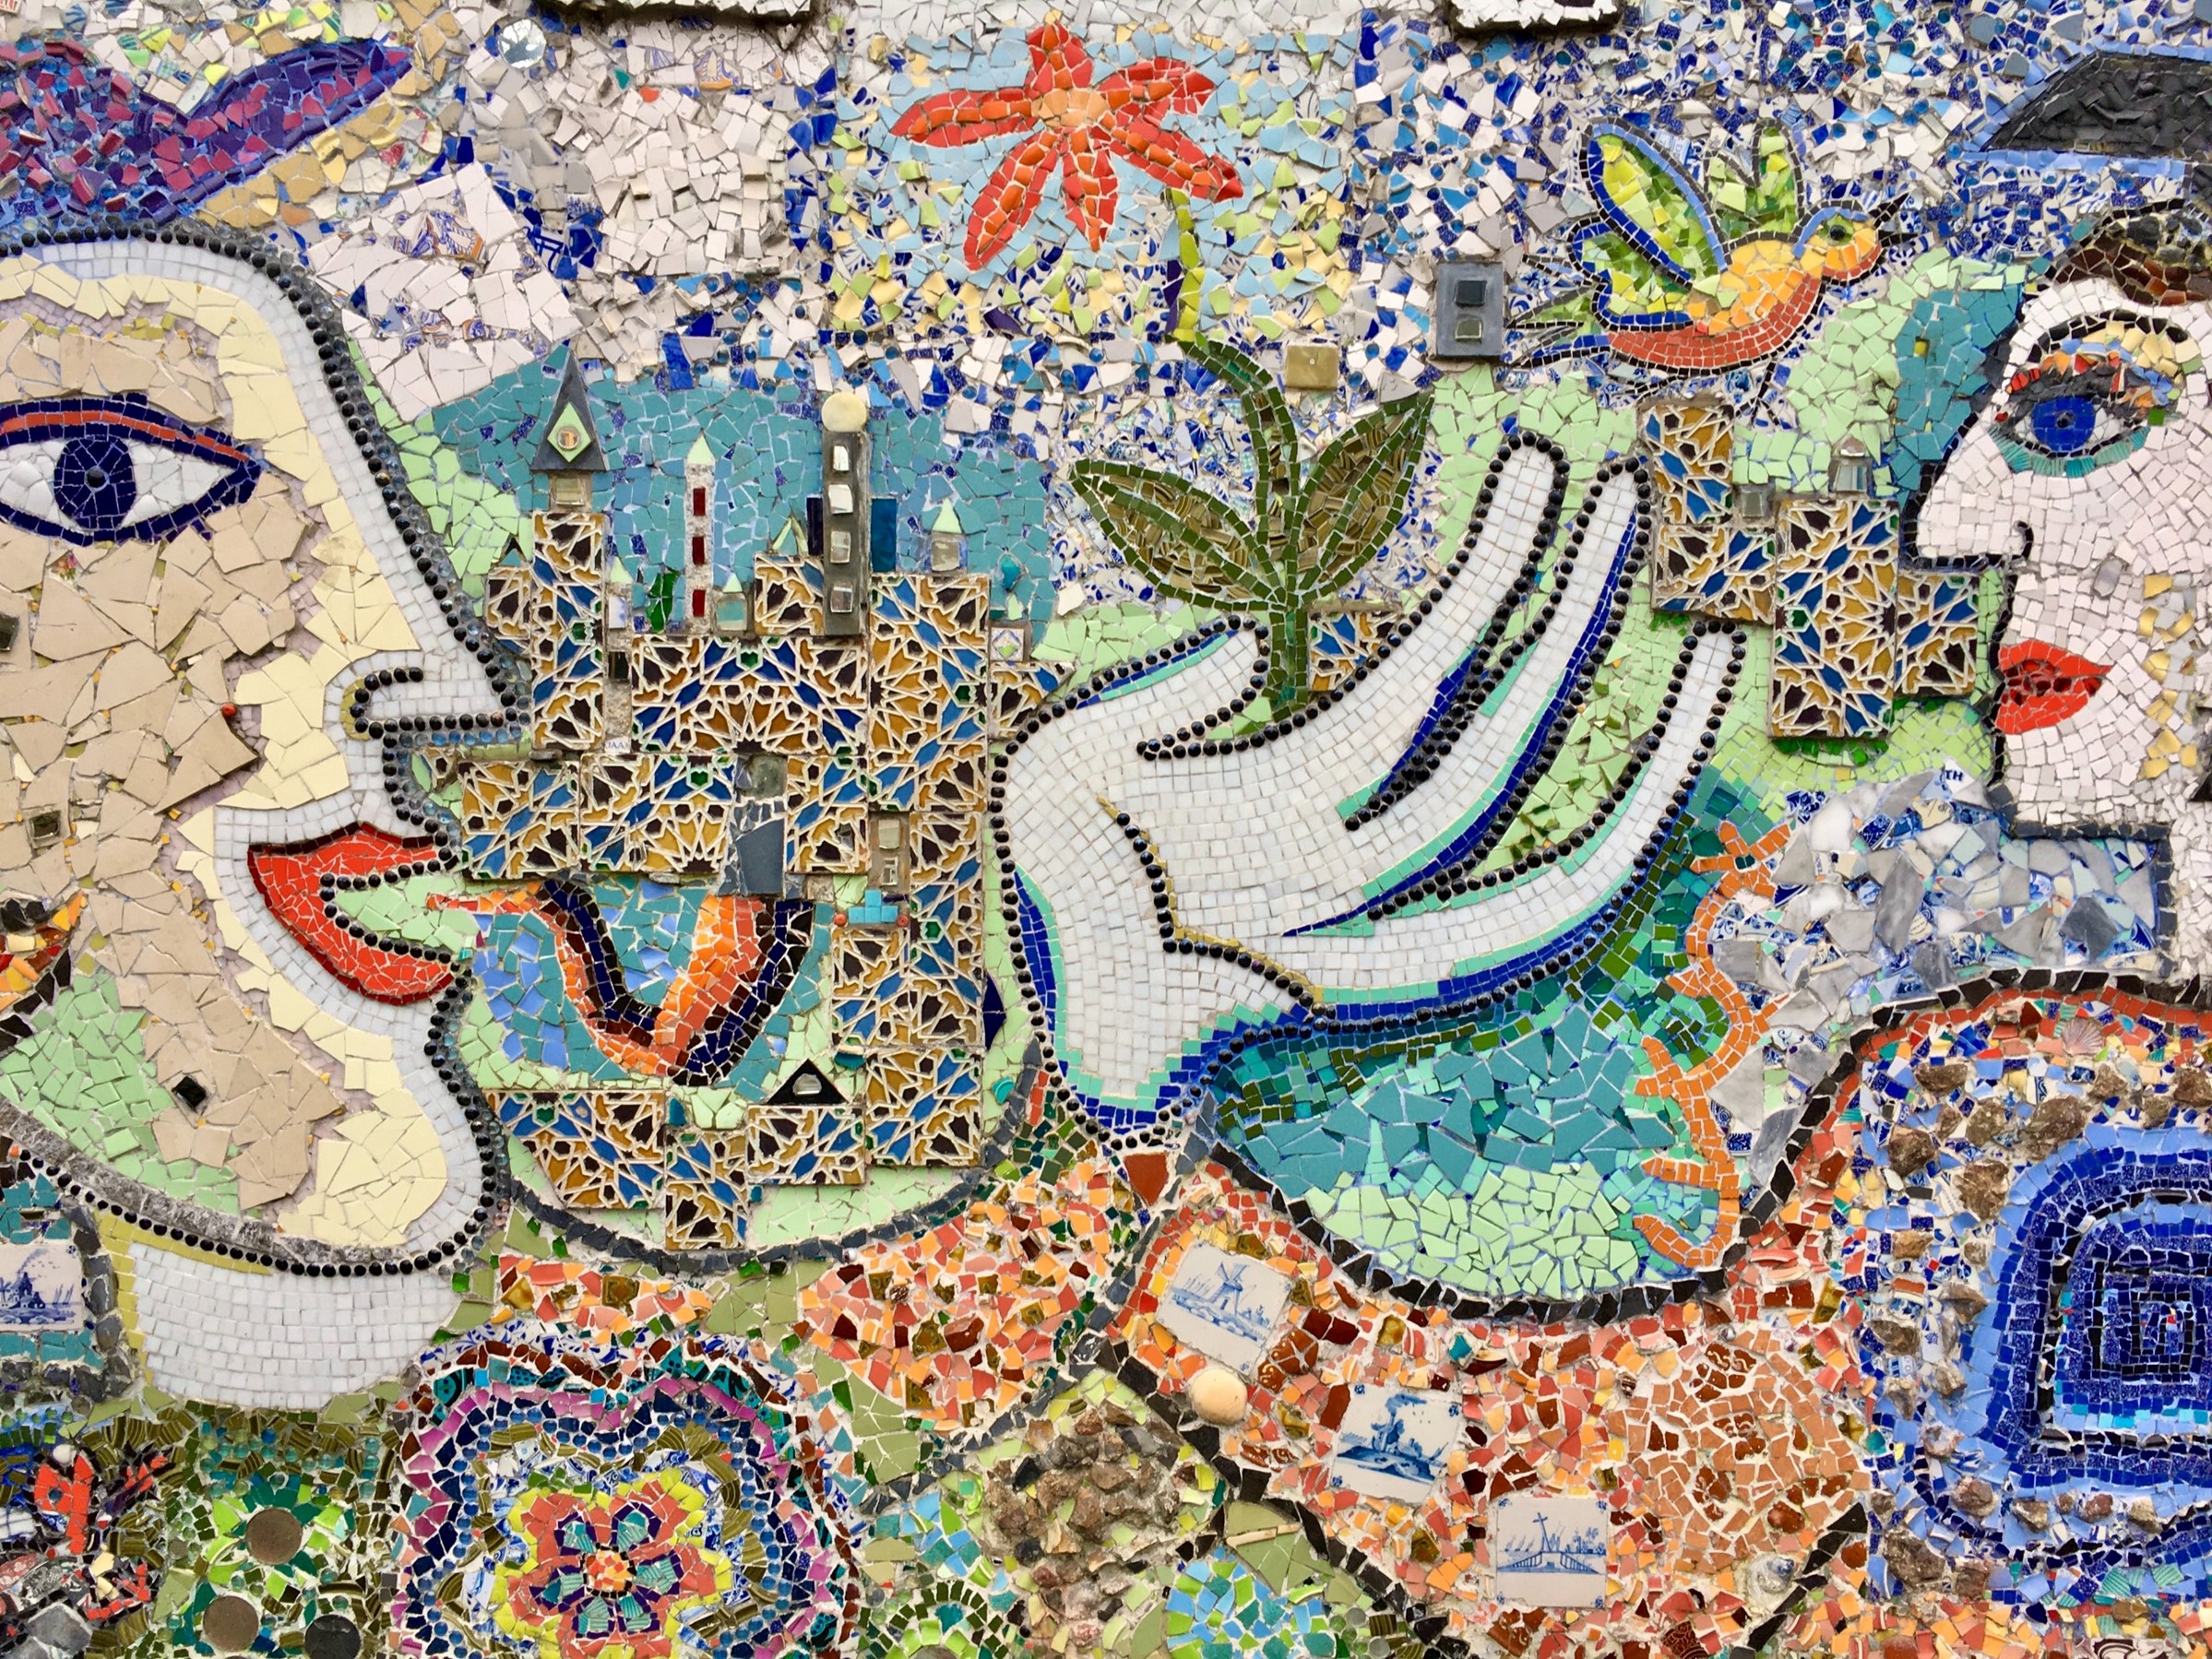 Mosaic of two people in conversation